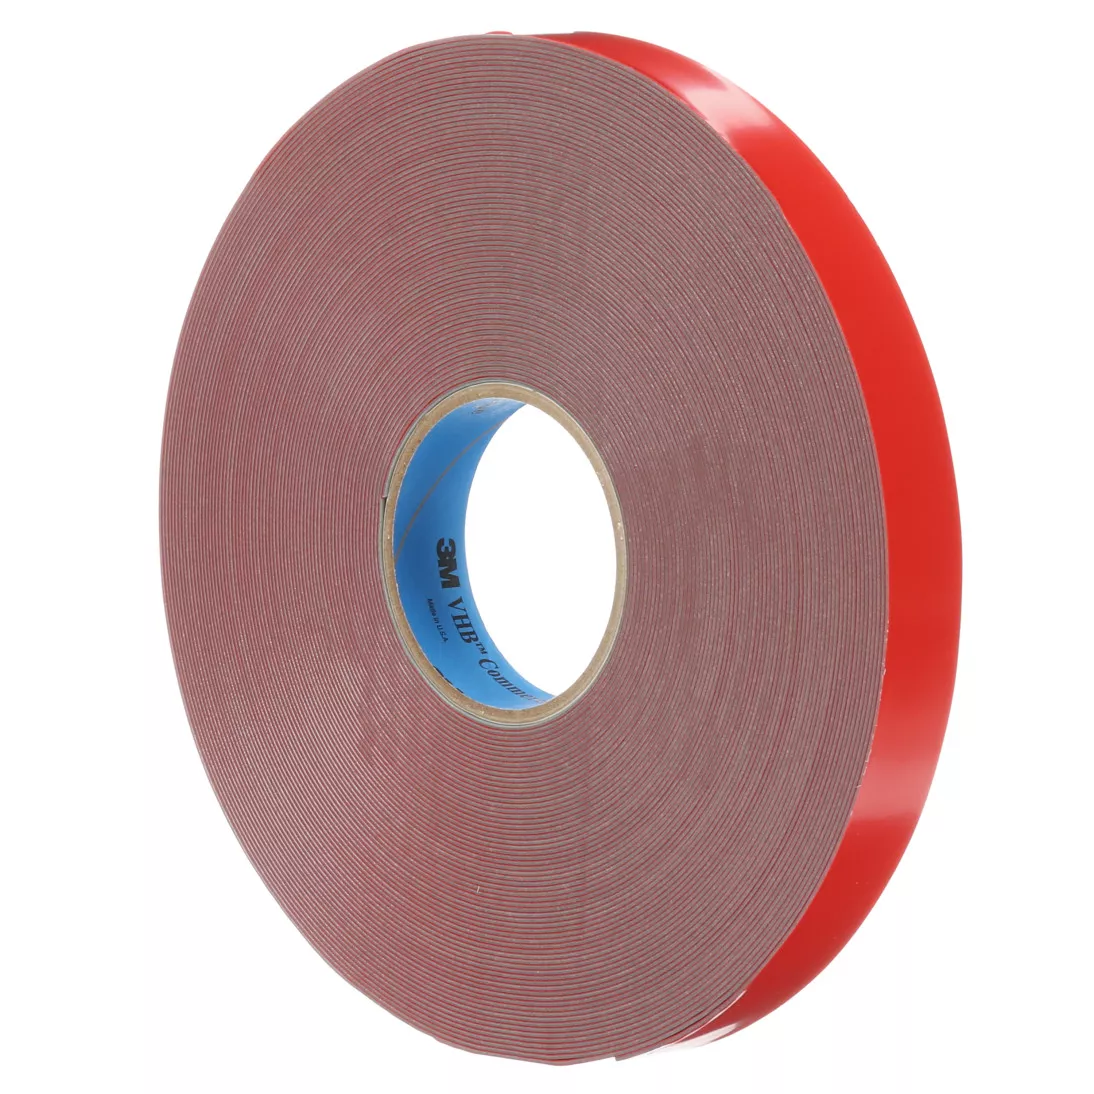 3M™ VHB™ Commercial Vehicle Tape CV45F, Gray, 1 in x 36 yd, 45 mil, Film
Liner, 9 rolls per case, Restricted